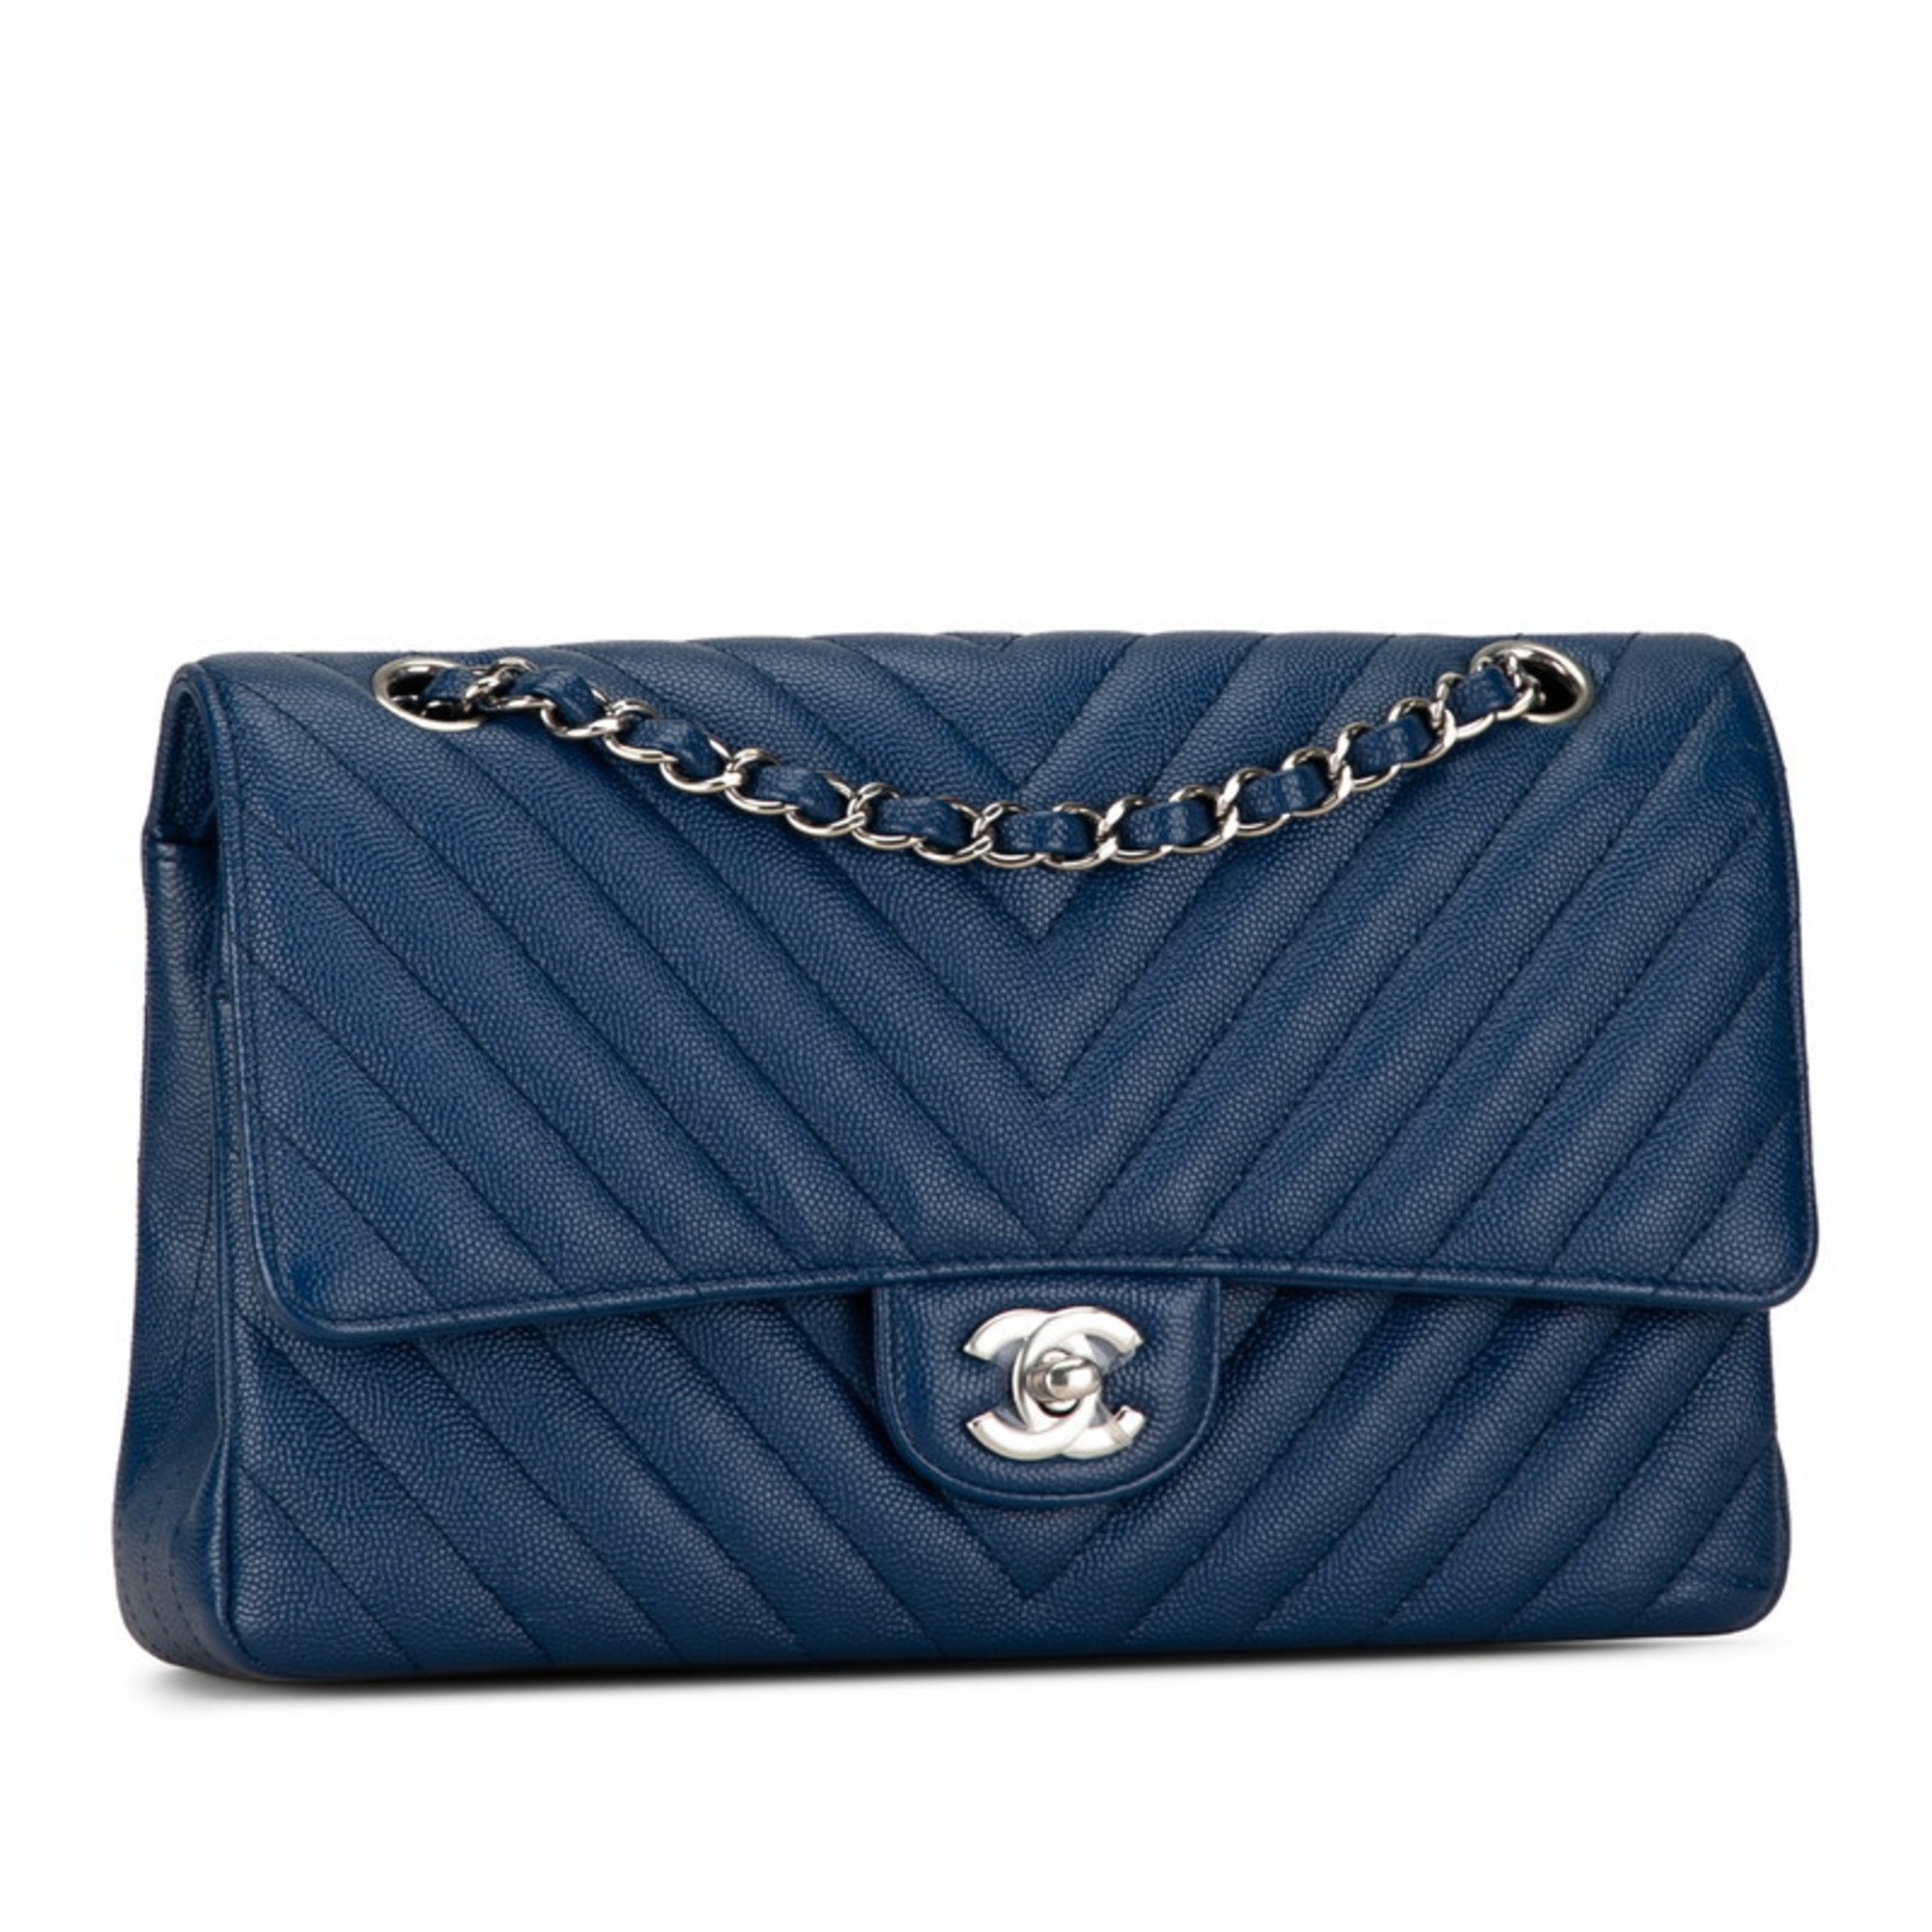 Chanel Coco Mark V Stitch Double Flap Chain Shoulder Bag Blue Leather Women's CHANEL